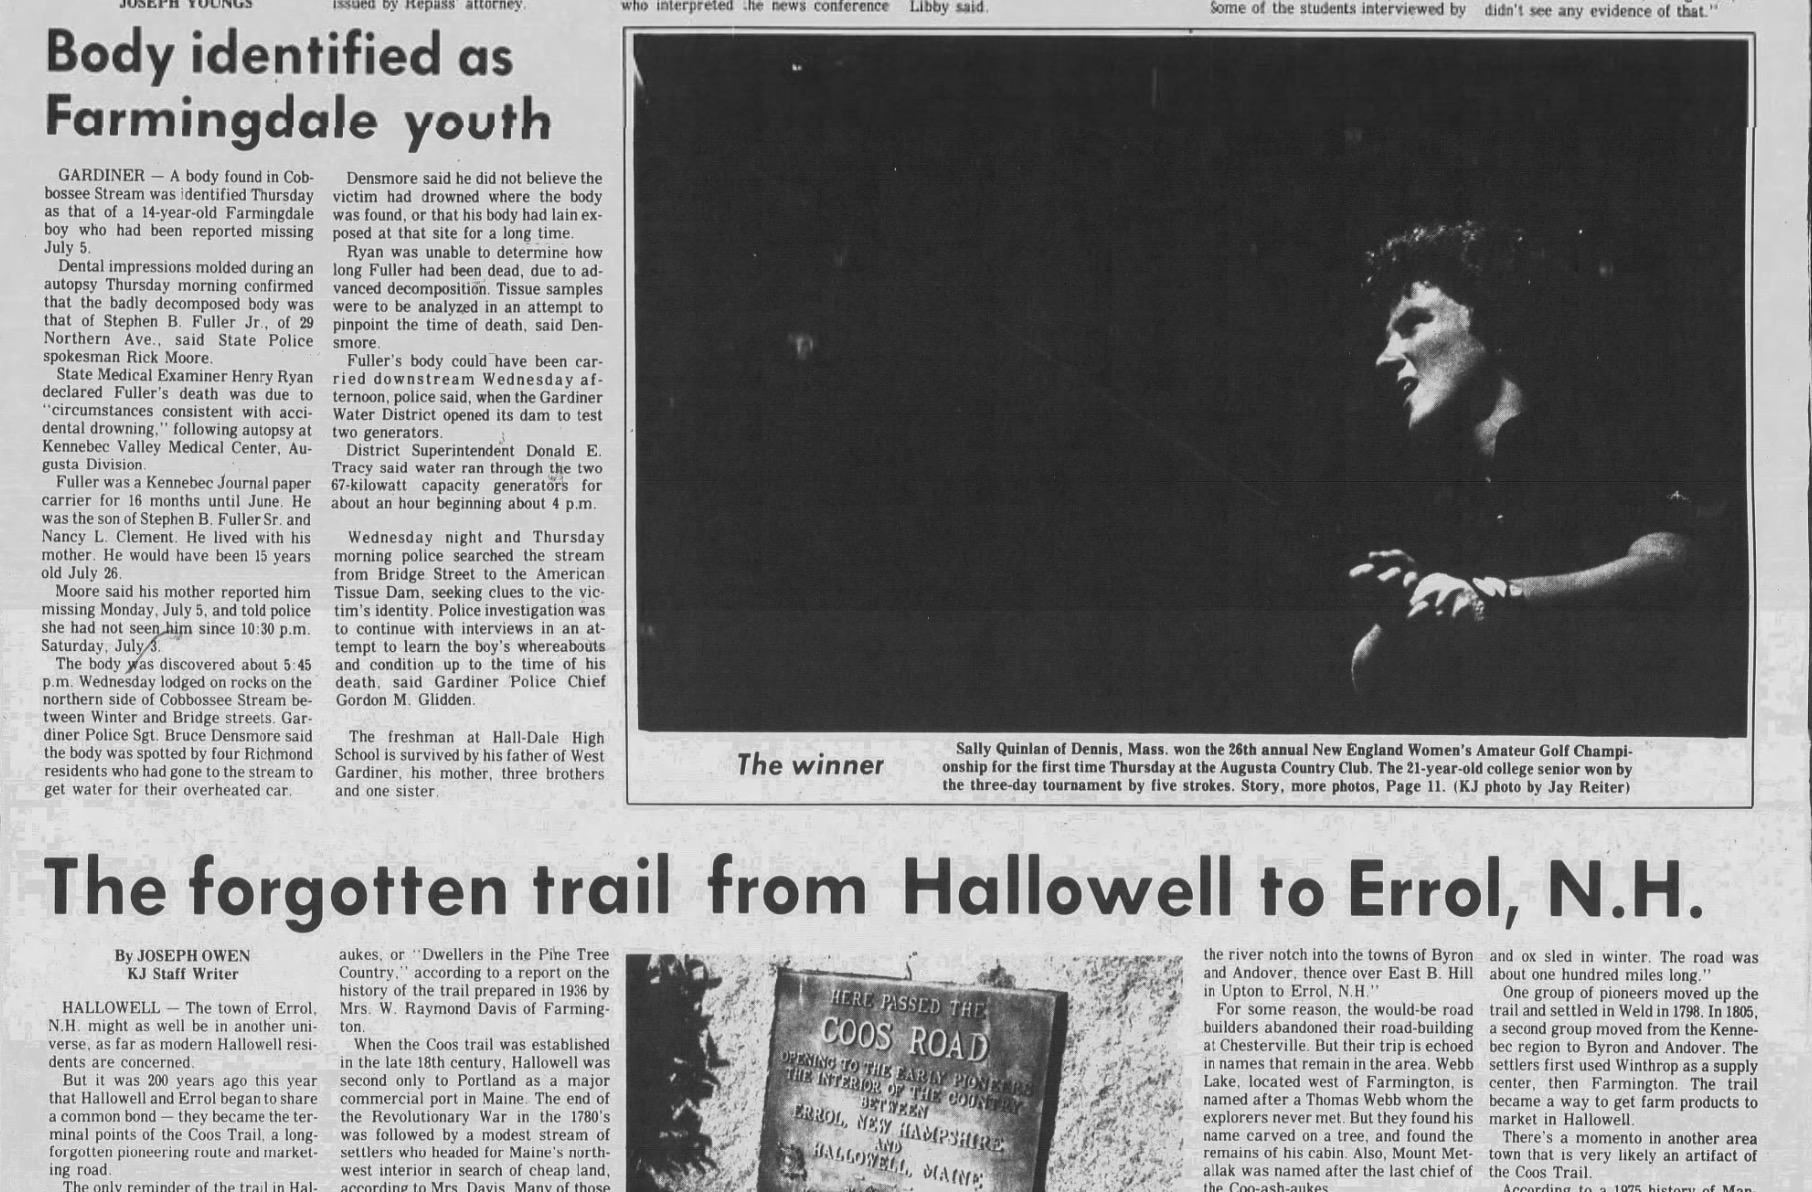 July 16, 1982 Pooper scooper law proposed in Augusta, 21-year-old college senior wins Augusta golf championship, and we take a look at a forgotten trail between Hallowell and Eroll, N.H. photo